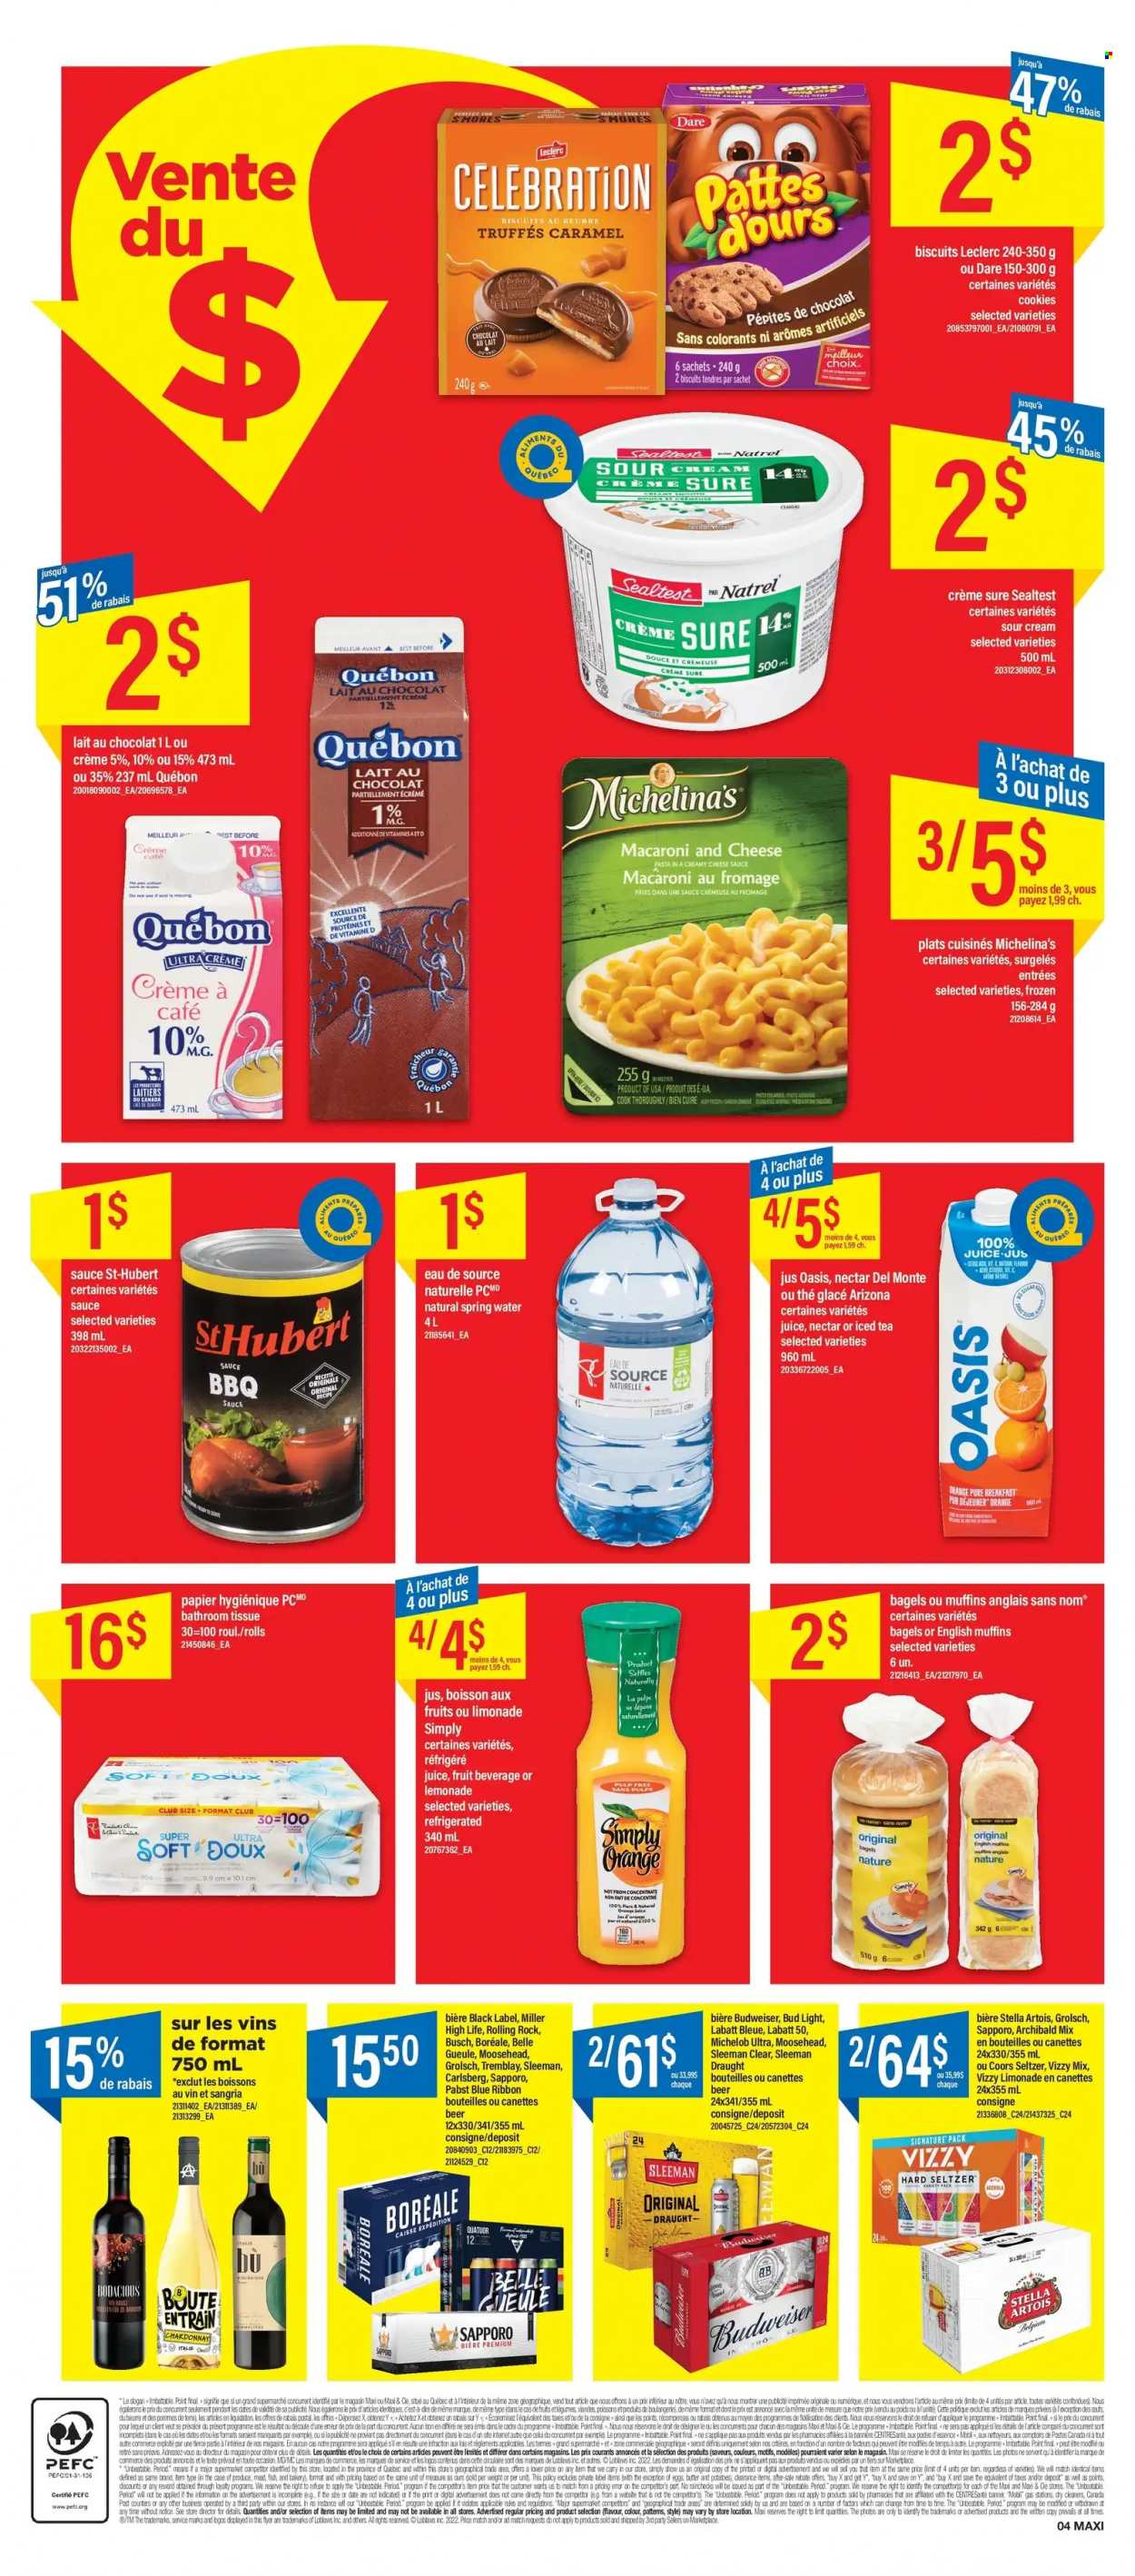 thumbnail - Maxi & Cie Flyer - June 30, 2022 - July 06, 2022 - Sales products - bagels, english muffins, fish, No Name, macaroni & cheese, pasta, sauce, eggs, sour cream, cookies, Celebration, biscuit, BBQ sauce, caramel, lemonade, orange juice, juice, ice tea, AriZona, spring water, Chardonnay, Hard Seltzer, beer, Busch, Bud Light, Carlsberg, Miller, Grolsch, Pabst Blue Ribbon, bath tissue, Sure, Budweiser, Stella Artois, Coors, Michelob. Page 4.